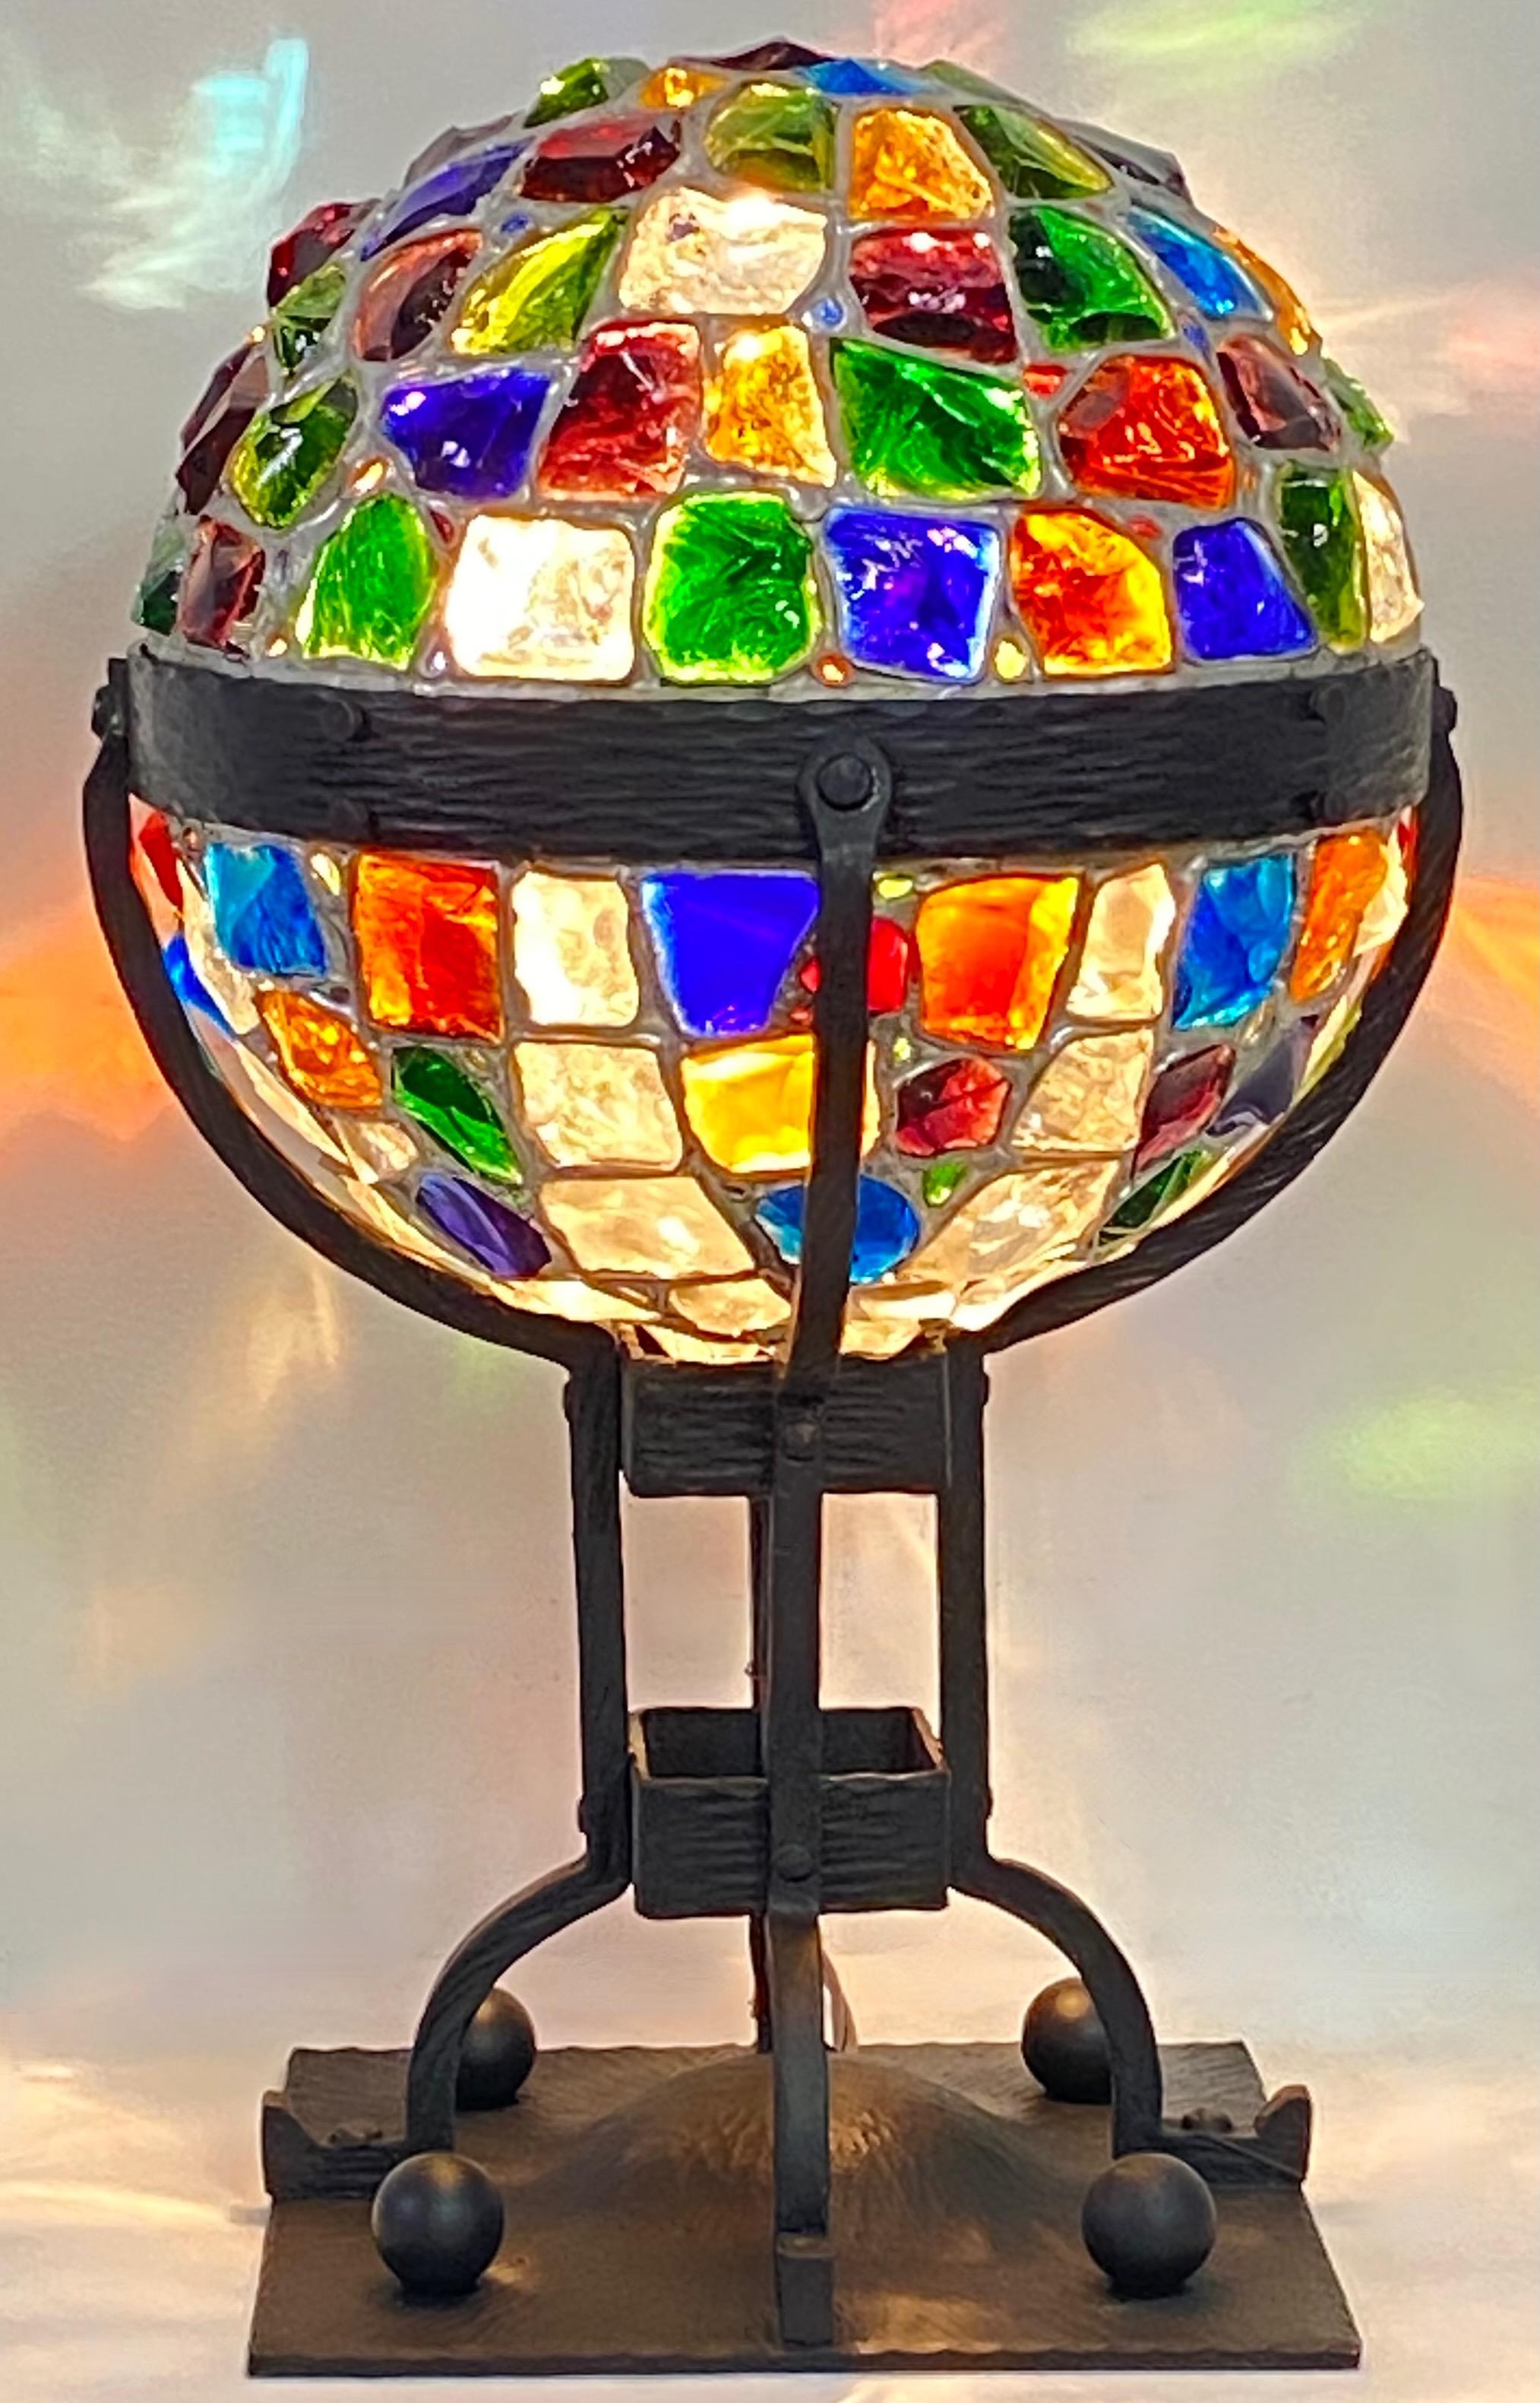 An unusual Secessionist period colorful glass chunk jewel newel post lamp. Wrought iron with colorful hand cut glass jewels in vibrant colors.
Arts and Crafts - Art Nouveau Style
Recently restored and re-wired. 
The square base measures 8 inches